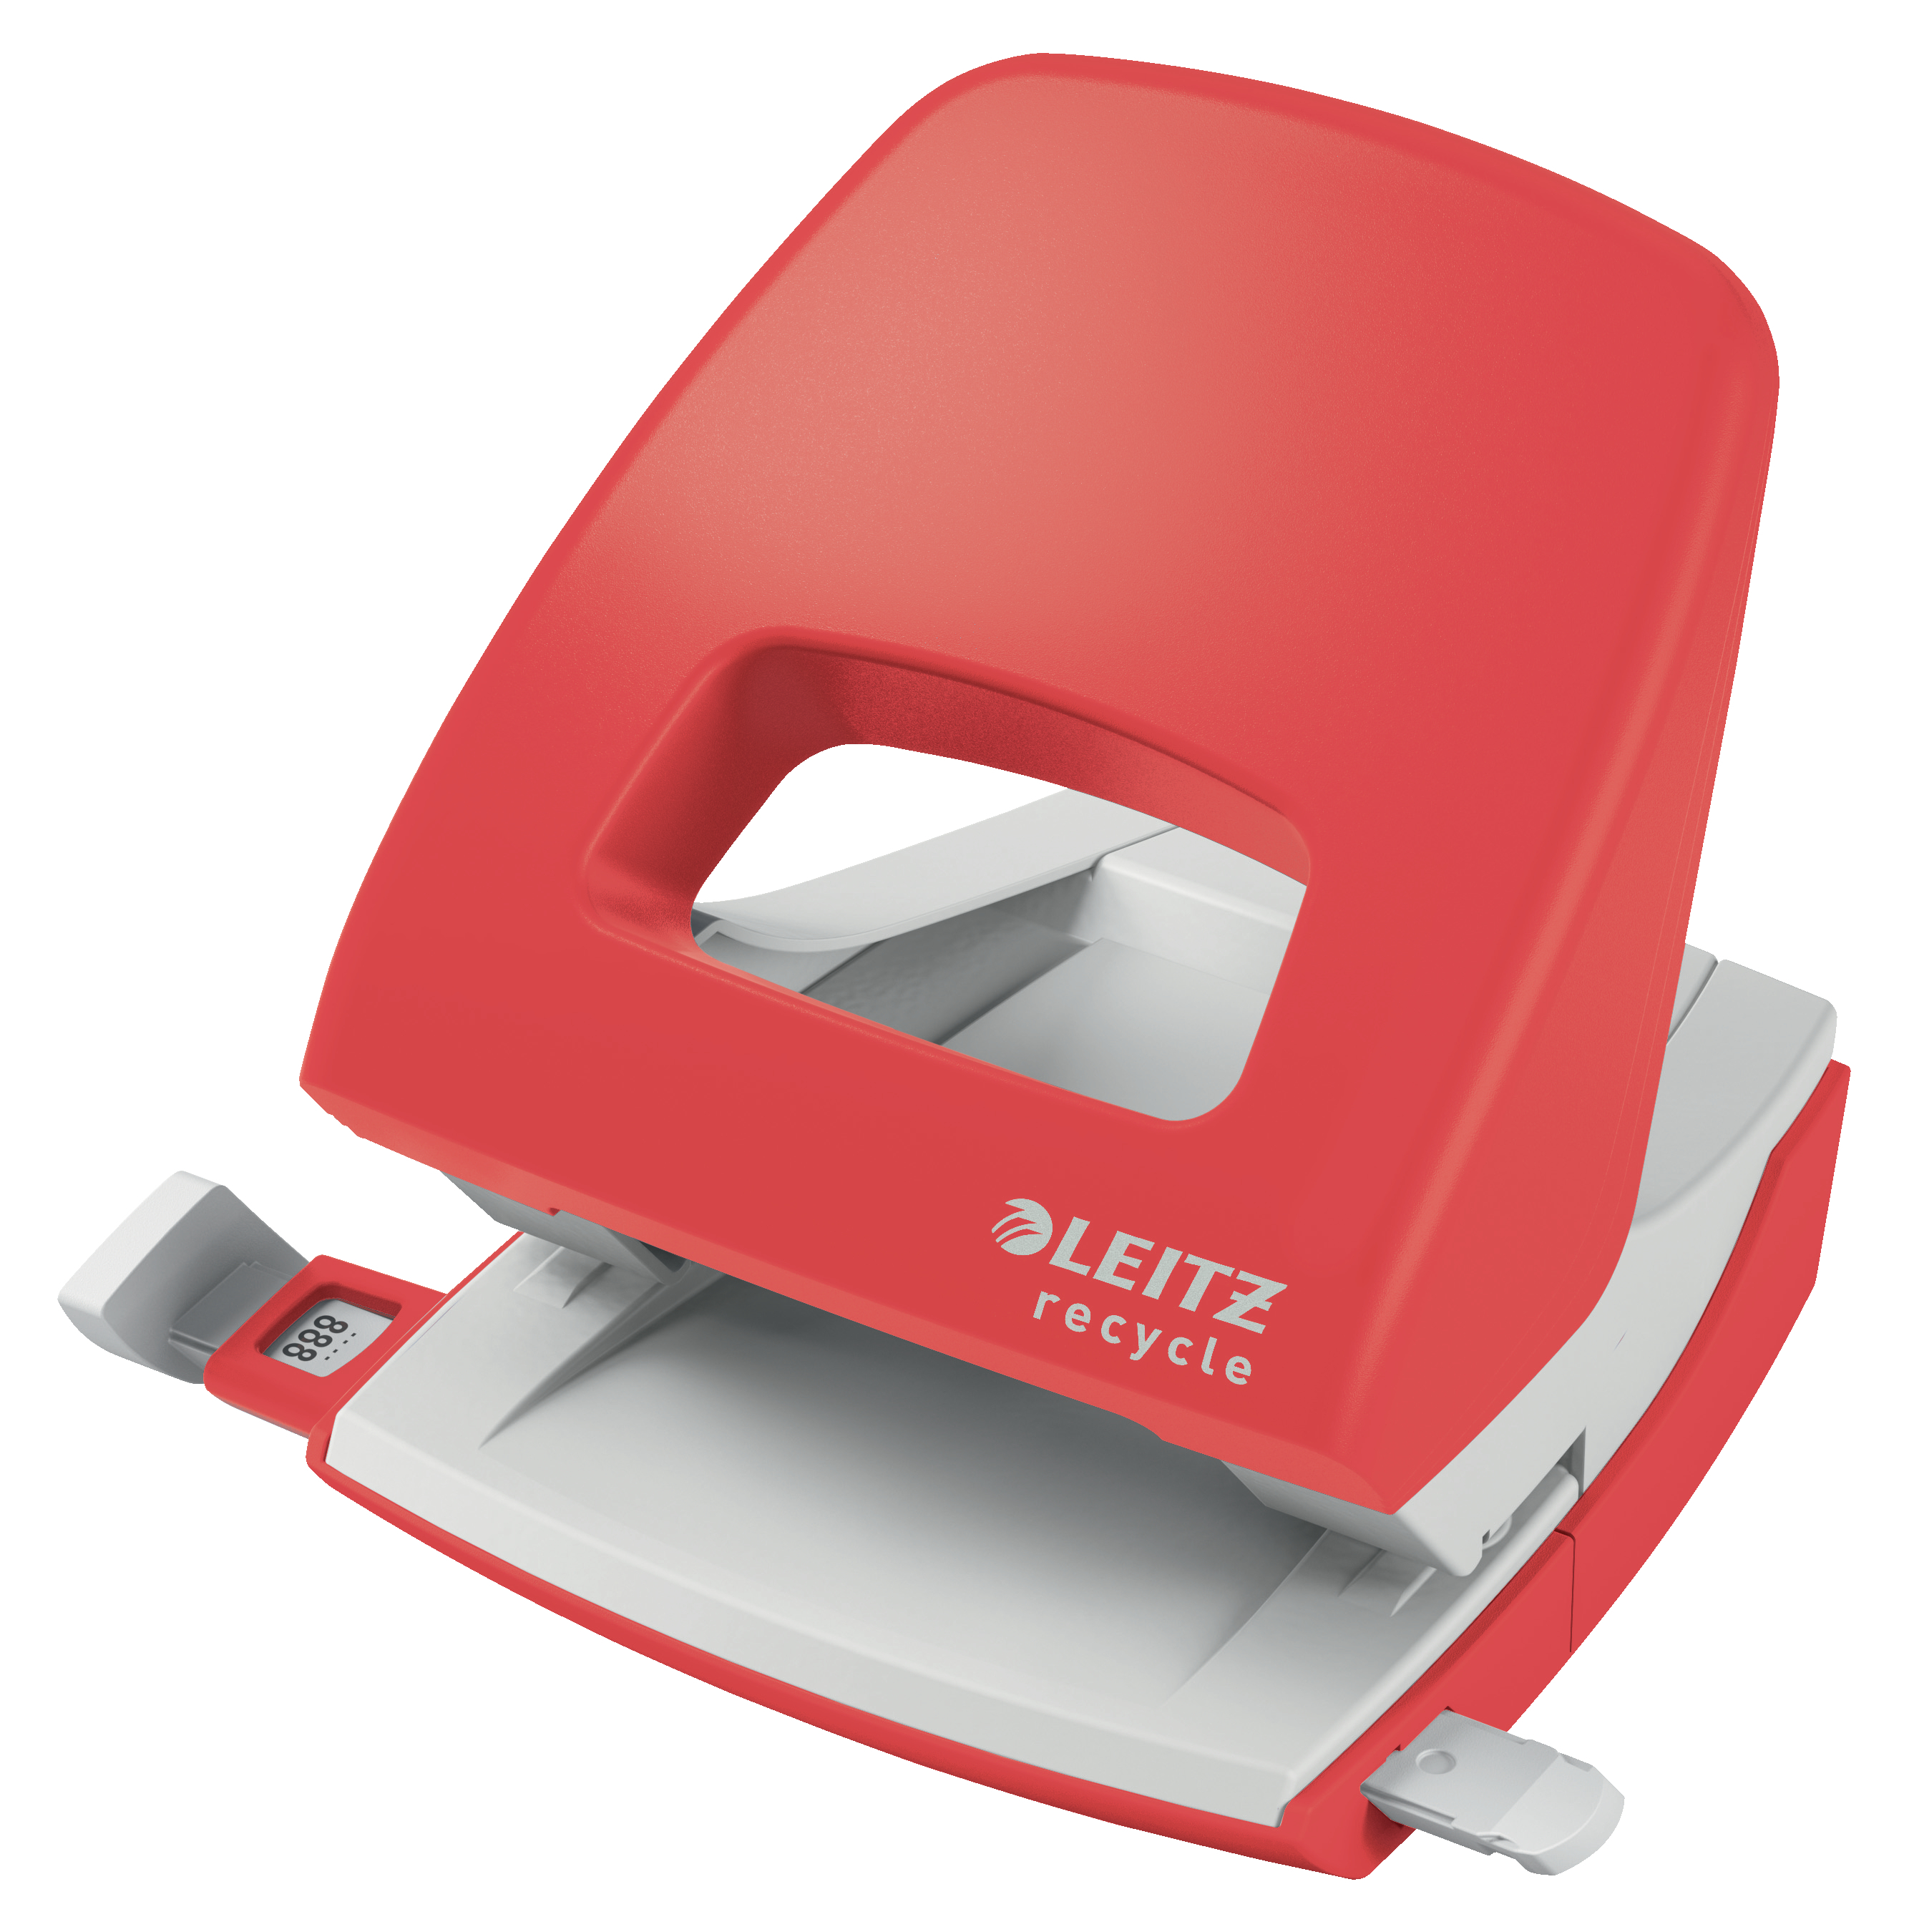 LEITZ Perforateur NeXXt Recycle 5003-00-25 rouge, CO2 neutre 30 feuilles rouge, CO2 neutre 30 feuill